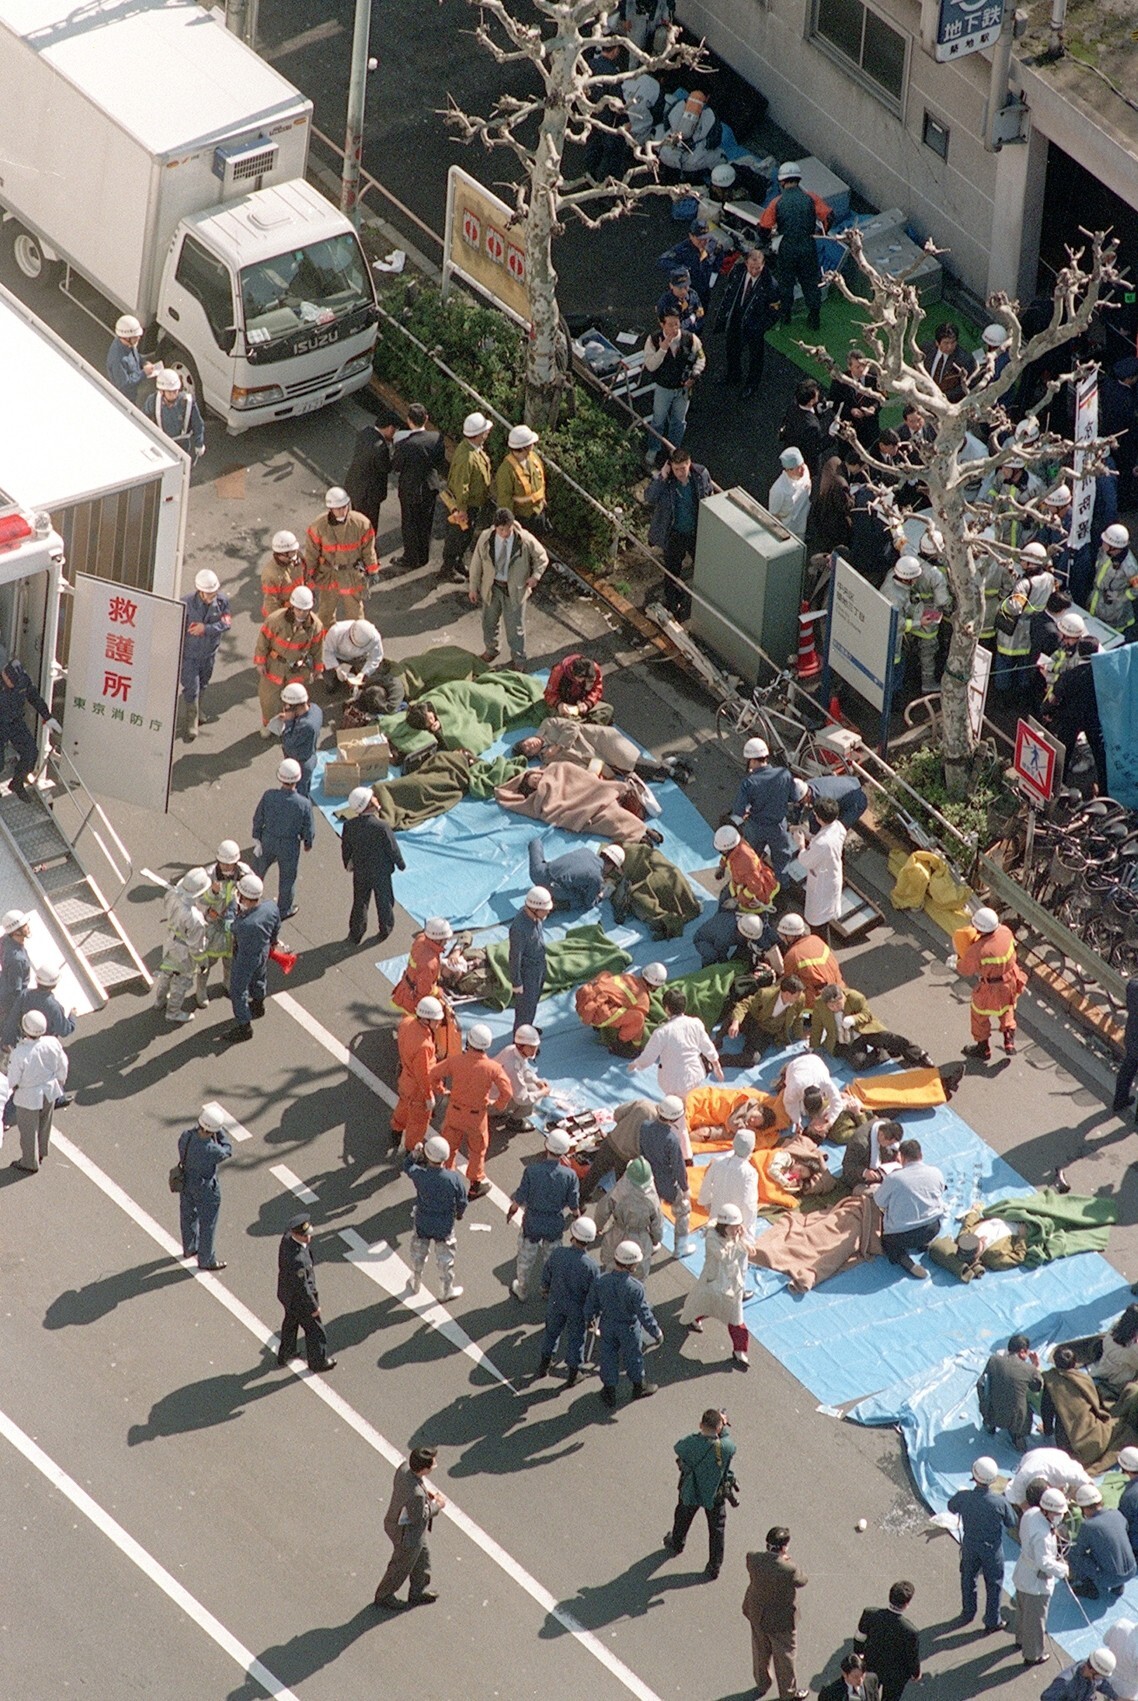 Subway passengers affected by sarin nerve gas are treated near Tsukiji station in Tokyo in this 1995 file photo. Photo: Kyodo News via AP